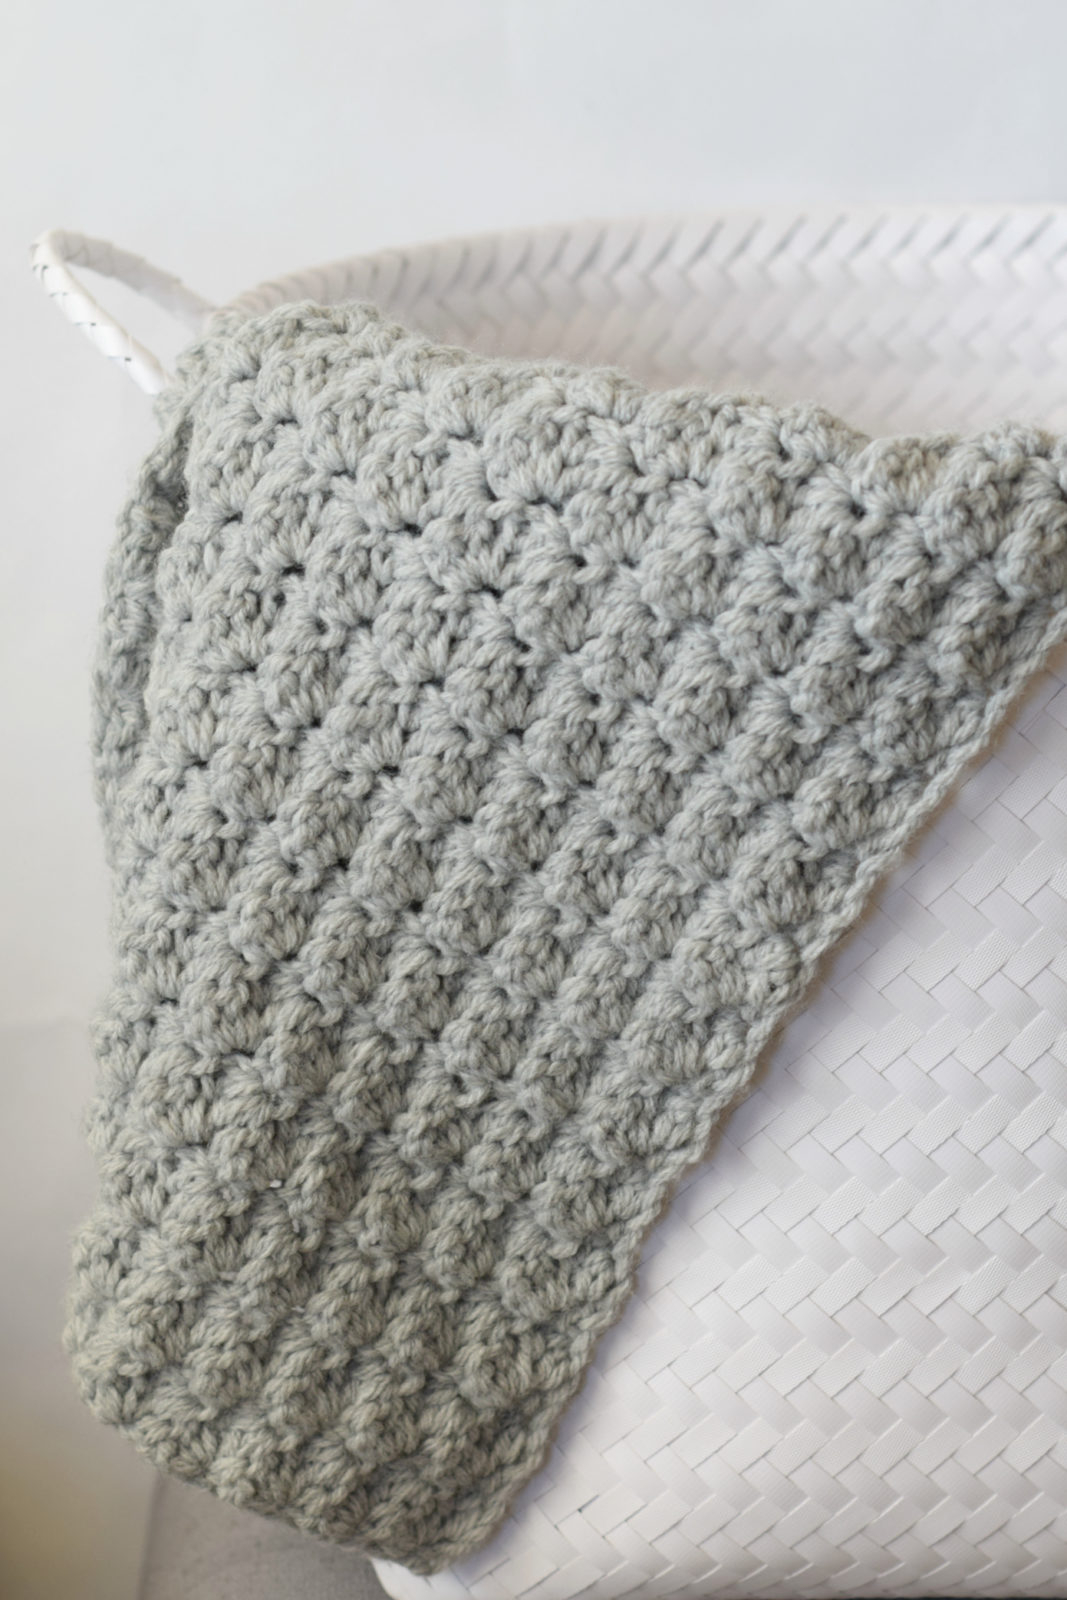 Knitted Baby Afghan Patterns Beginner Simple Crocheted Blanket Go To Pattern Mama In A Stitch